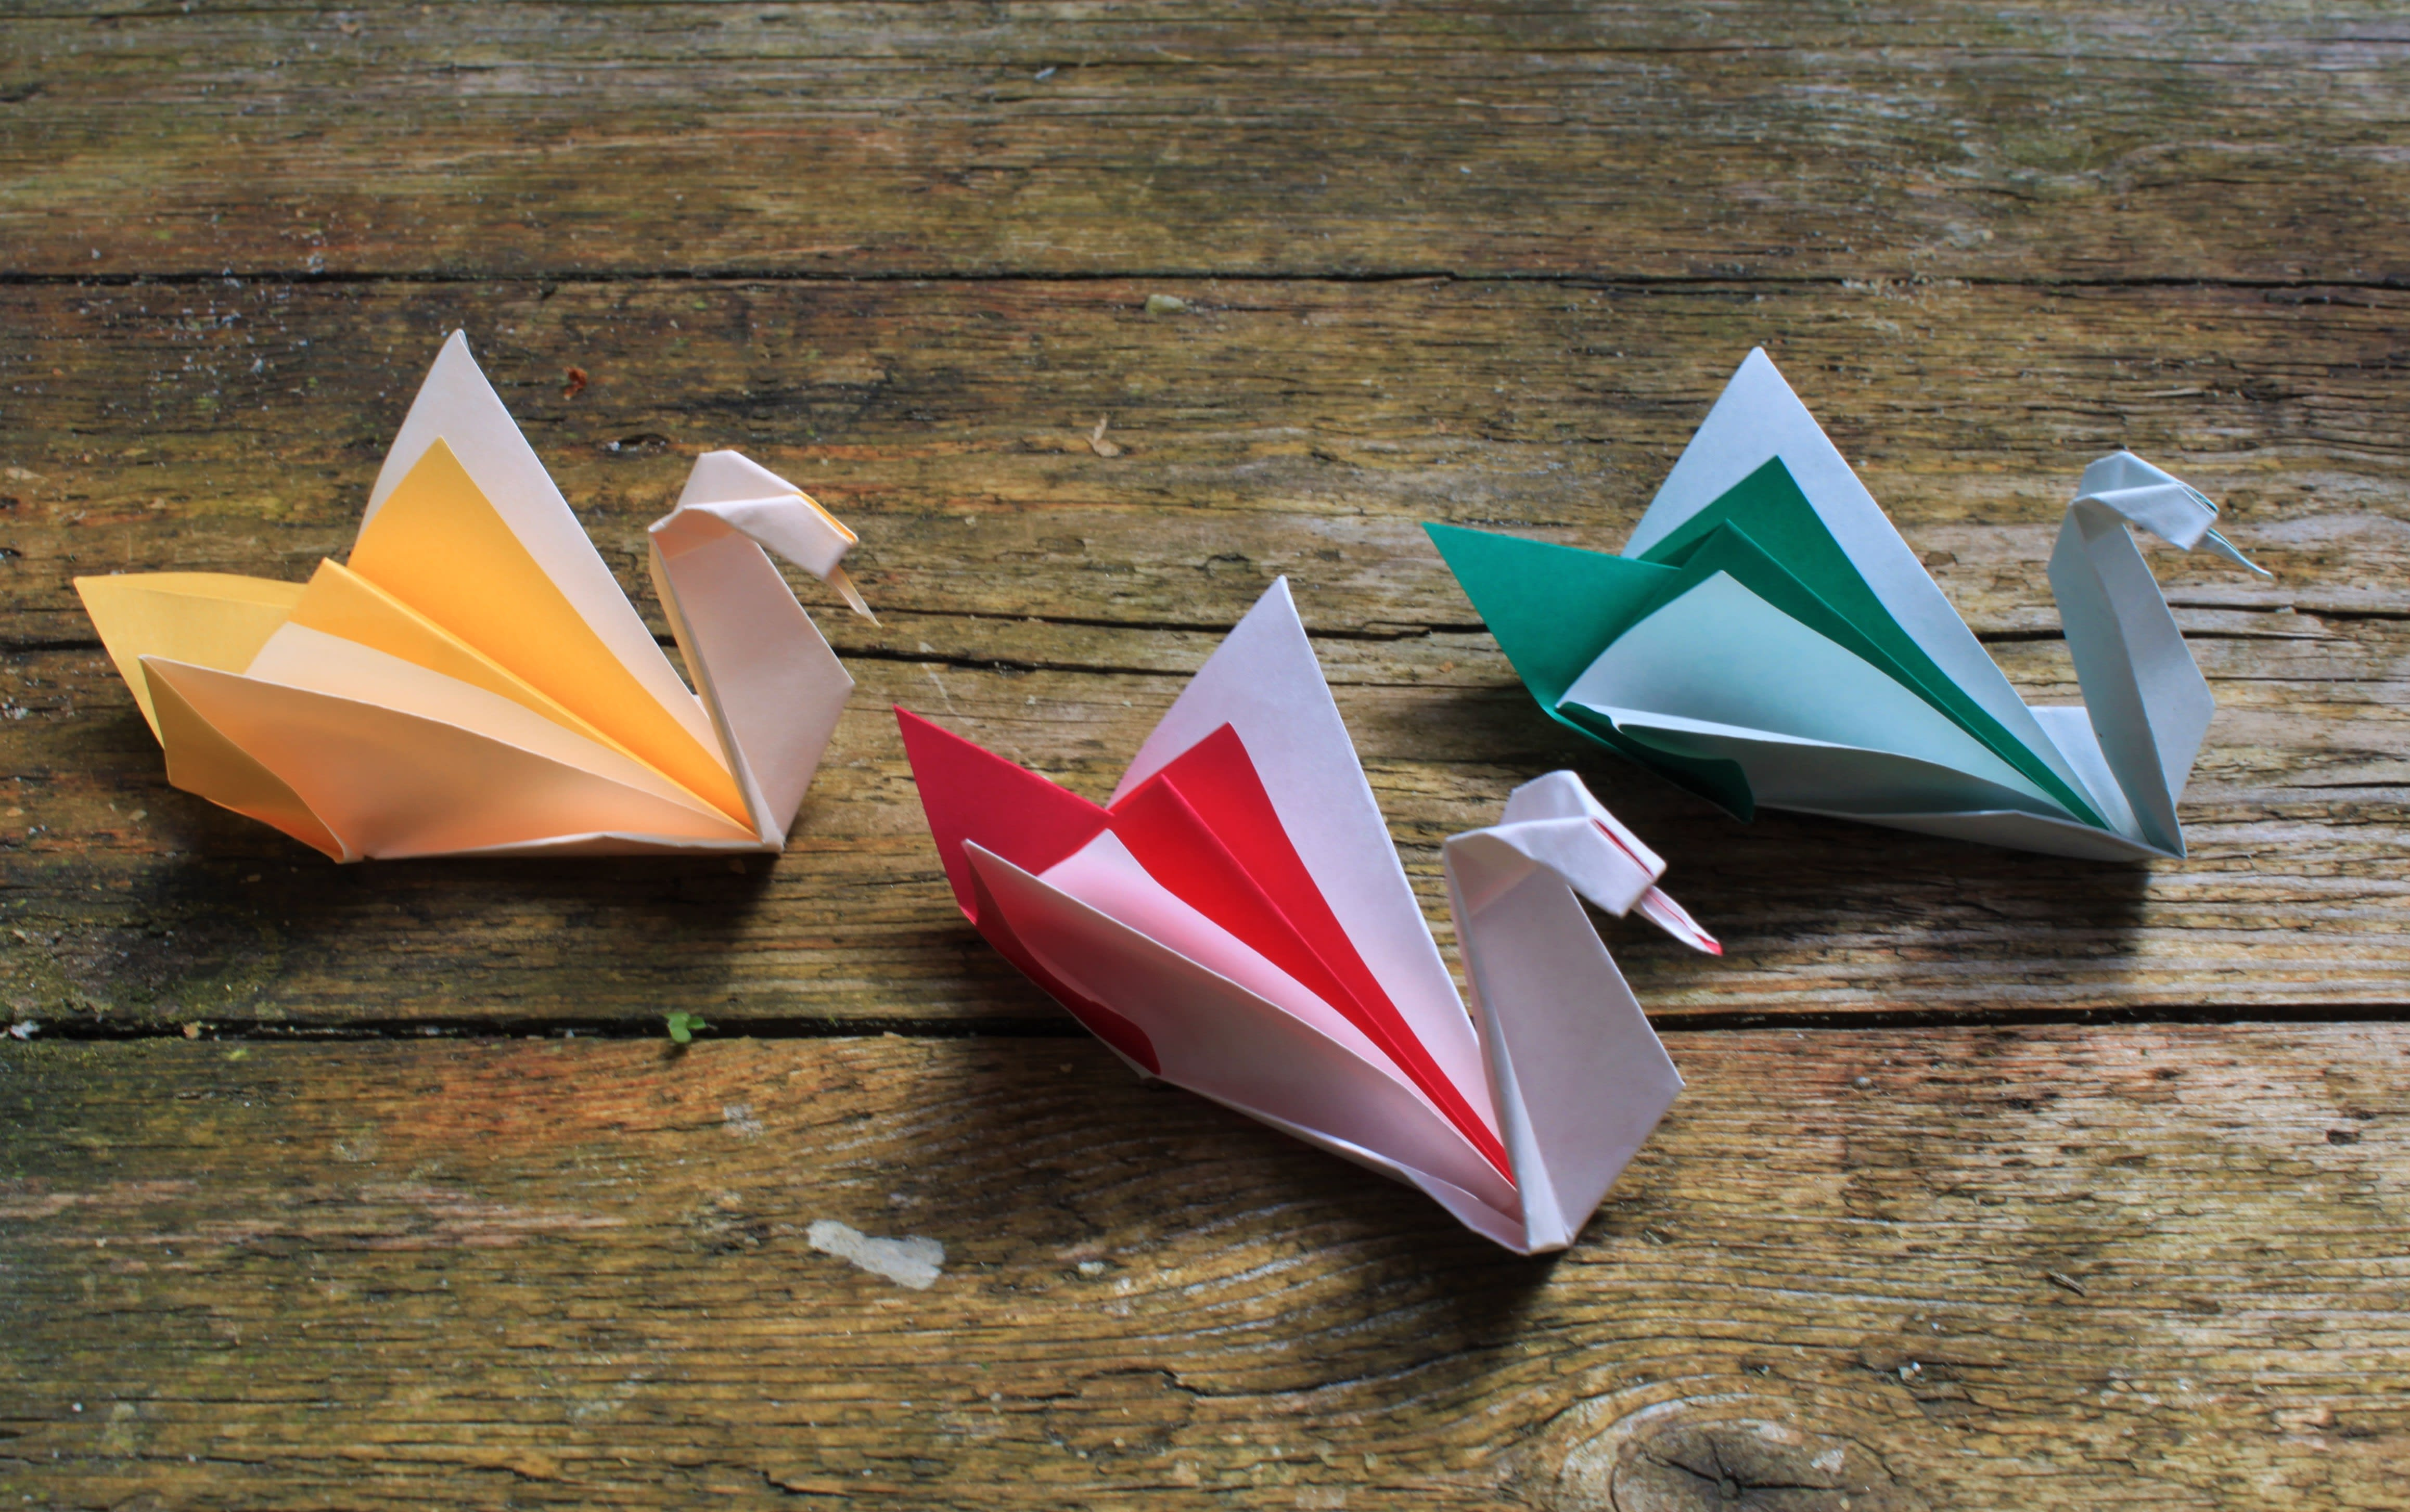 Ten Pound Note Origami Fold And Send Origami Swans For Wedding Gifts